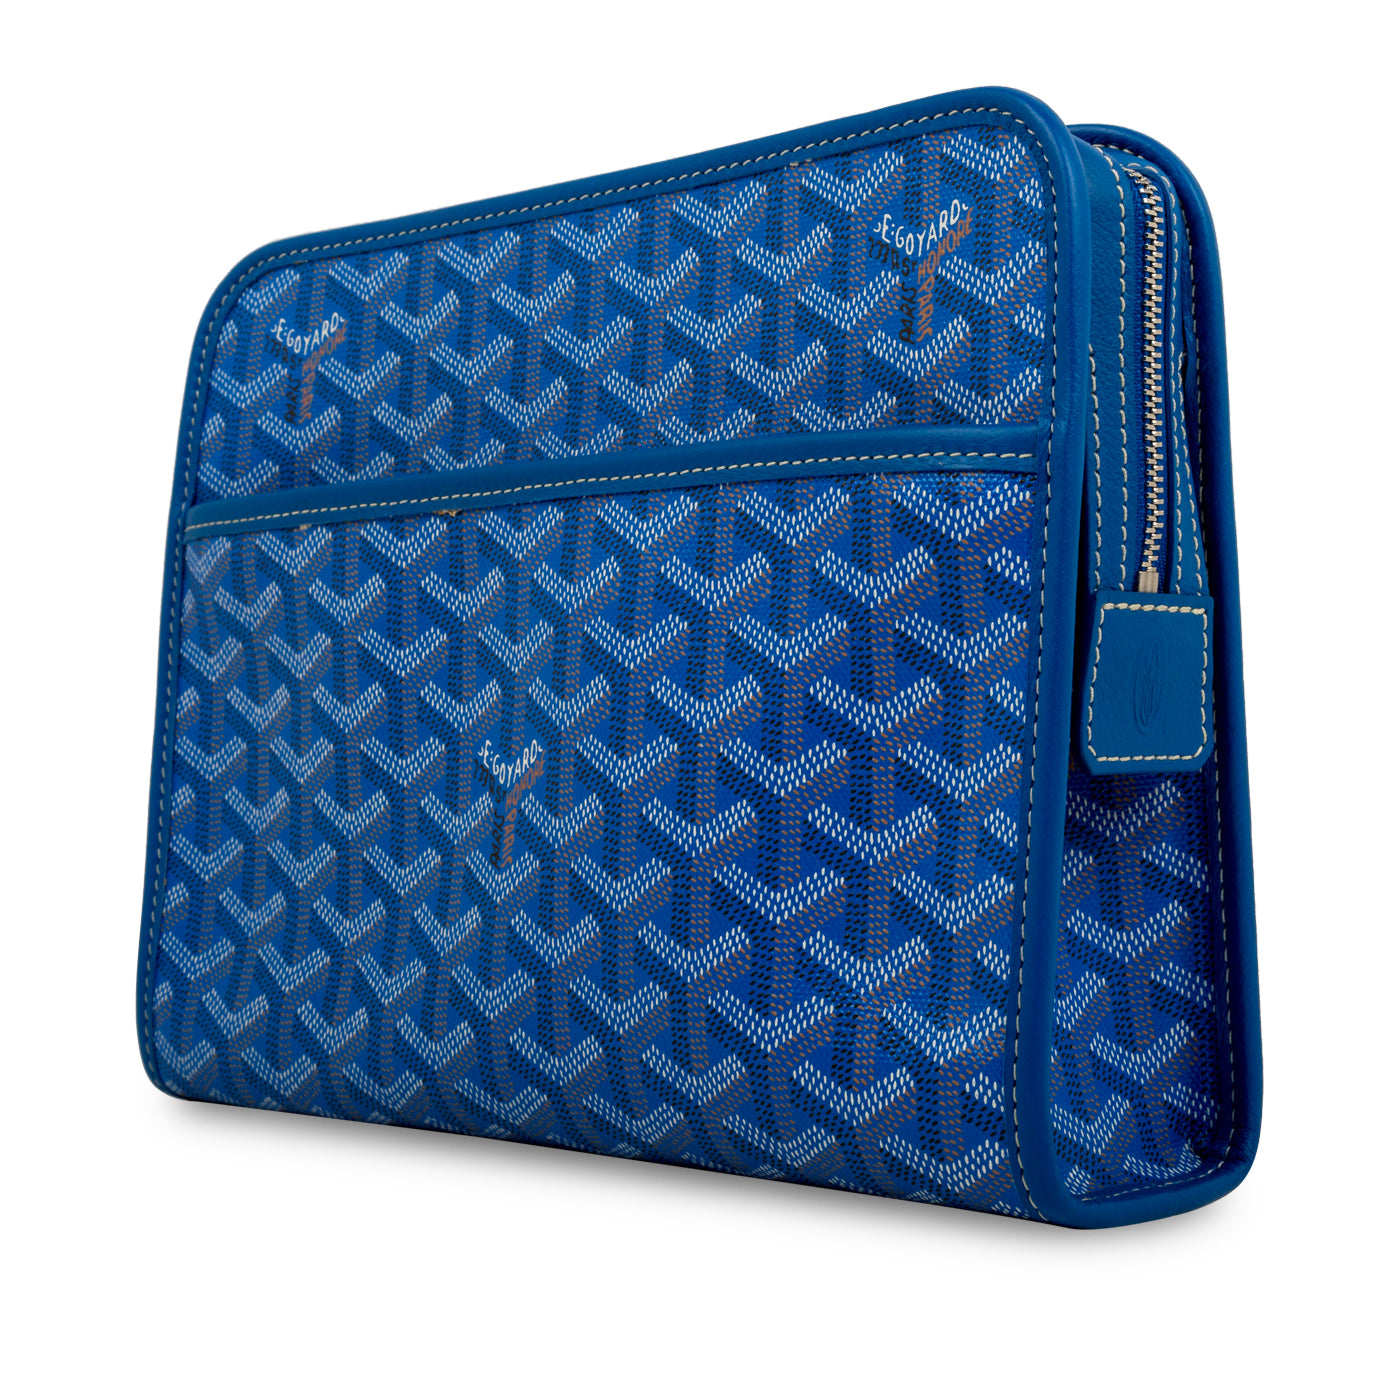 Introducing the Goyard Jouvence Toiletry Bag MM in 'Blue' 💧 A must-ha